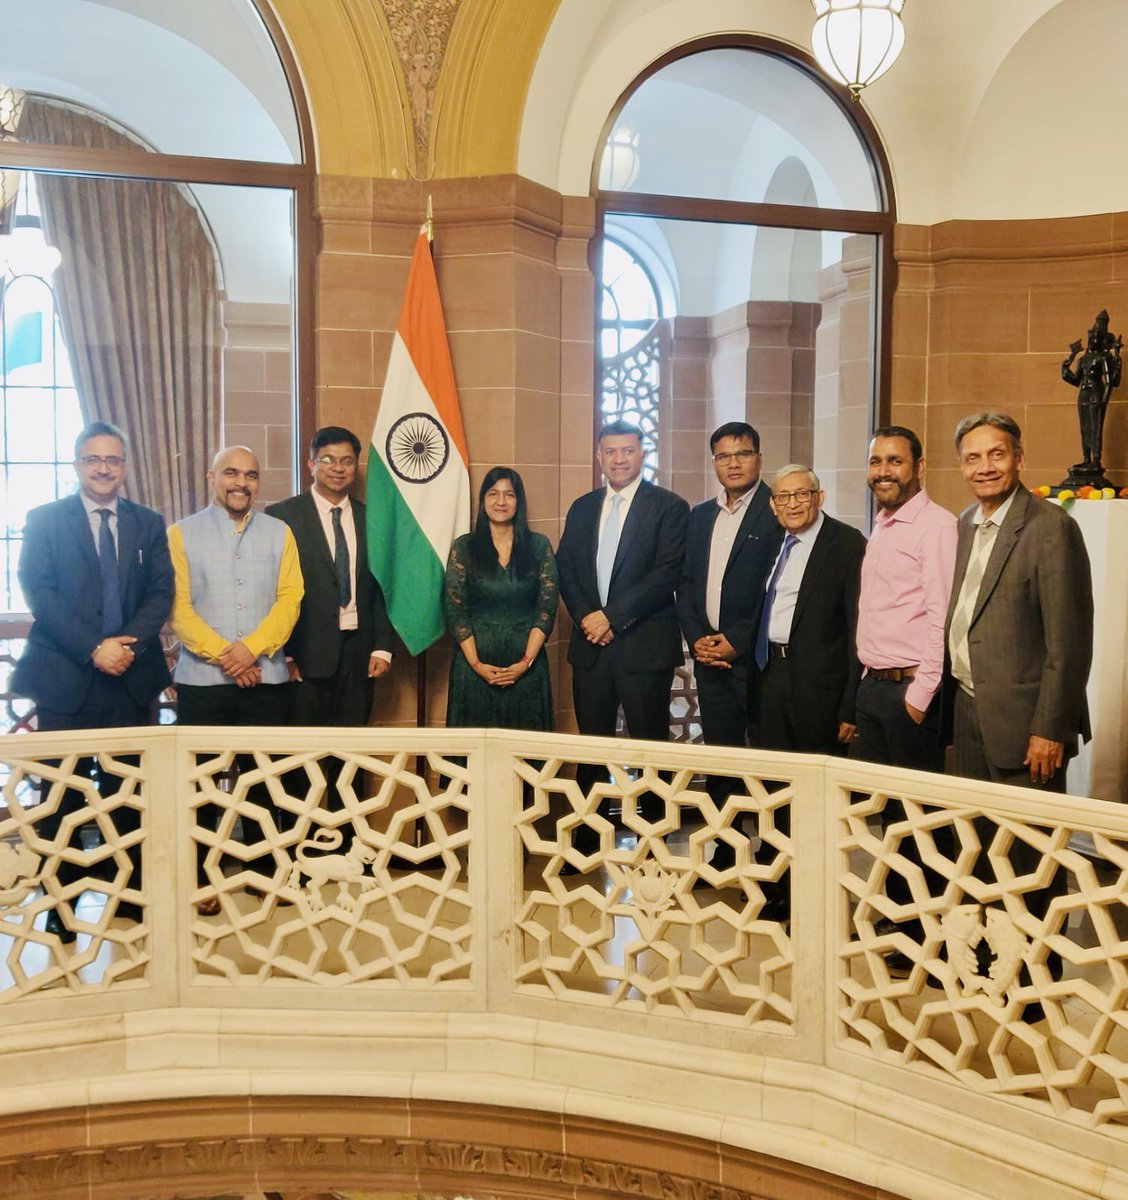 Members of Friends of India Society International, UK @FISI_UK met HC @VDoraiswami at @HCI_London today and discussed issues of interest to Indian community in the UK. HC reiterated Mission’s commitment to support the community in every way possible. @MEAIndia @sujitjoyghosh